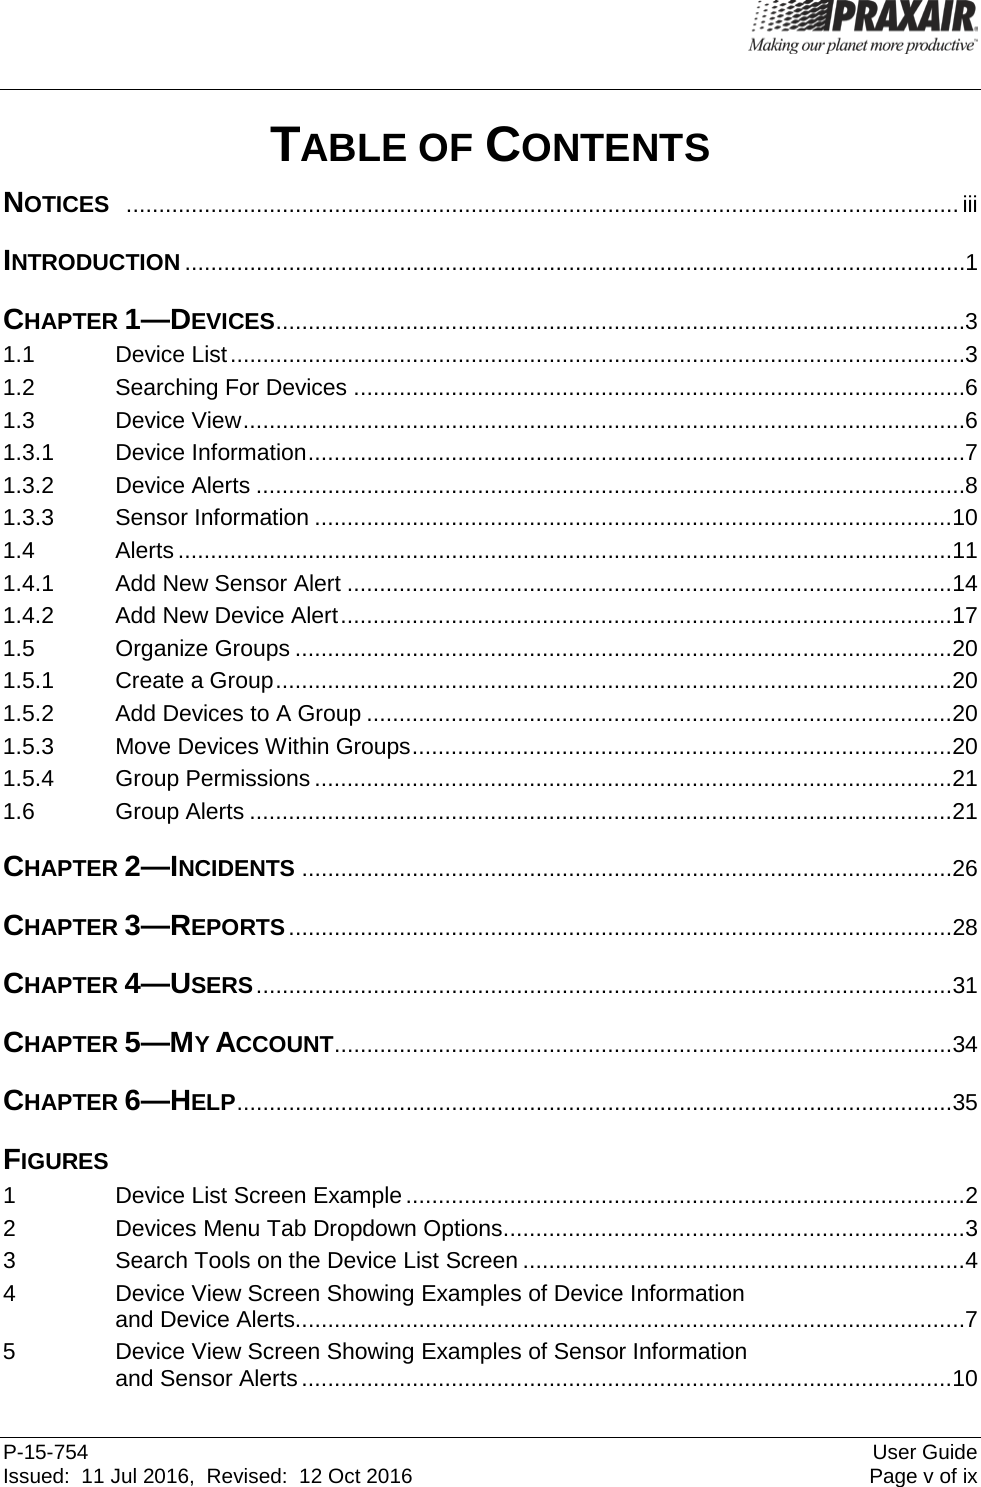  P-15-754 User Guide Issued:  11 Jul 2016,  Revised:  12 Oct 2016  Page v of ix TABLE OF CONTENTS NOTICES  ................................................................................................................................ iii INTRODUCTION ........................................................................................................................ 1 CHAPTER 1—DEVICES .......................................................................................................... 3 1.1 Device List ................................................................................................................. 3 1.2 Searching For Devices .............................................................................................. 6 1.3 Device View ............................................................................................................... 6 1.3.1 Device Information ..................................................................................................... 7 1.3.2 Device Alerts ............................................................................................................. 8 1.3.3 Sensor Information .................................................................................................. 10 1.4 Alerts ....................................................................................................................... 11 1.4.1 Add New Sensor Alert ............................................................................................. 14 1.4.2 Add New Device Alert .............................................................................................. 17 1.5 Organize Groups ..................................................................................................... 20 1.5.1 Create a Group ........................................................................................................ 20 1.5.2 Add Devices to A Group .......................................................................................... 20 1.5.3 Move Devices Within Groups ................................................................................... 20 1.5.4 Group Permissions .................................................................................................. 21 1.6 Group Alerts ............................................................................................................ 21 CHAPTER 2—INCIDENTS .................................................................................................... 26 CHAPTER 3—REPORTS ...................................................................................................... 28 CHAPTER 4—USERS ........................................................................................................... 31 CHAPTER 5—MY ACCOUNT ............................................................................................... 34 CHAPTER 6—HELP .............................................................................................................. 35 FIGURES 1  Device List Screen Example ...................................................................................... 2 2  Devices Menu Tab Dropdown Options ....................................................................... 3 3  Search Tools on the Device List Screen .................................................................... 4 4  Device View Screen Showing Examples of Device Information and Device Alerts....................................................................................................... 7 5  Device View Screen Showing Examples of Sensor Information and Sensor Alerts .................................................................................................... 10 